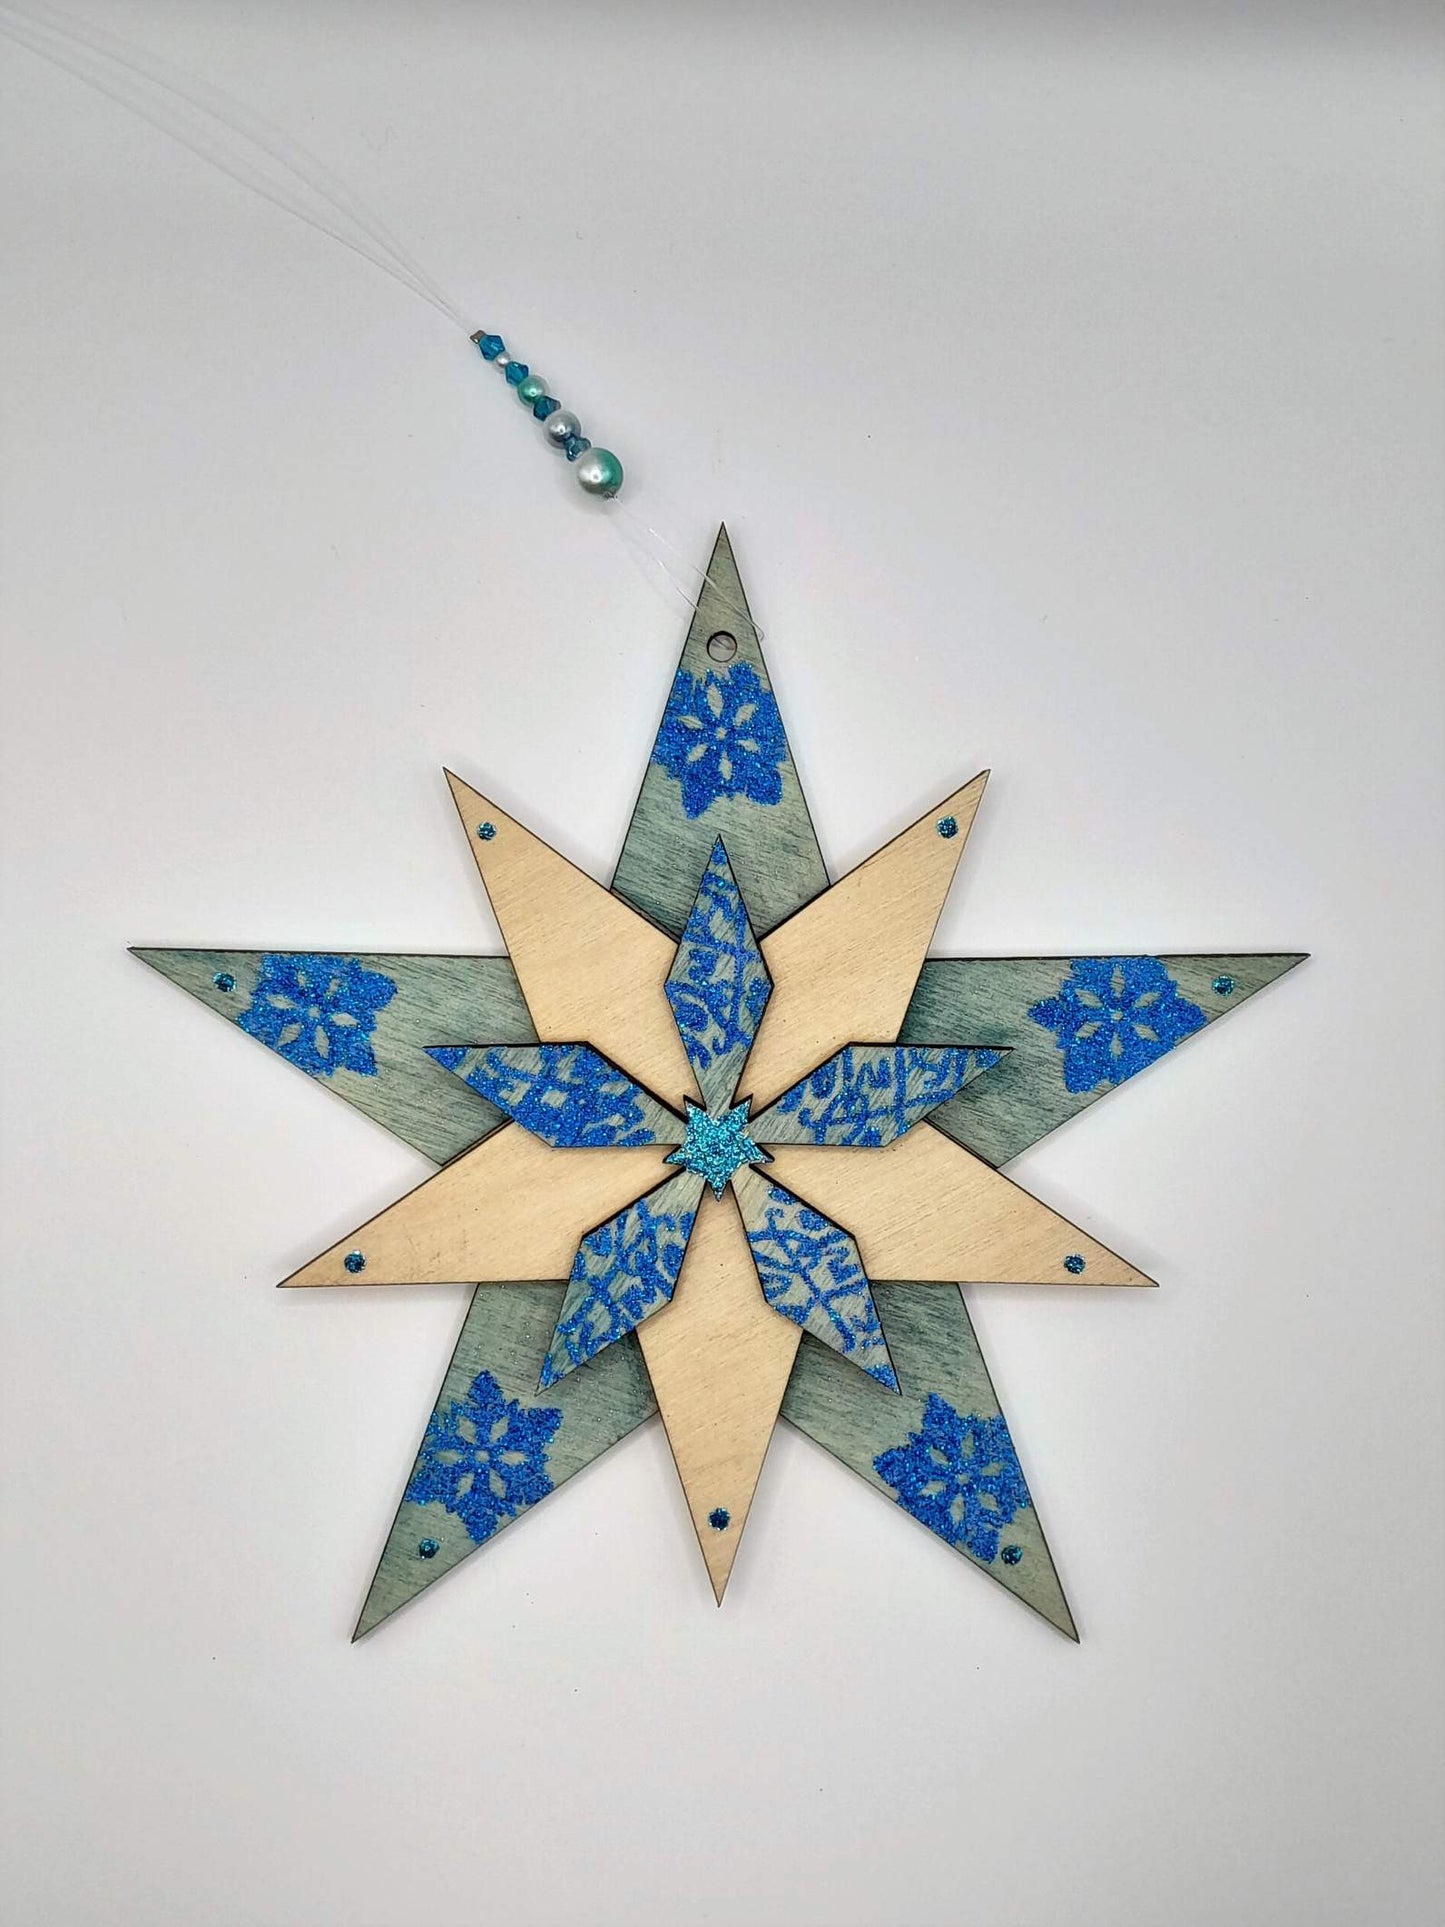 Hand made wooden star - Turquoise and natural wood